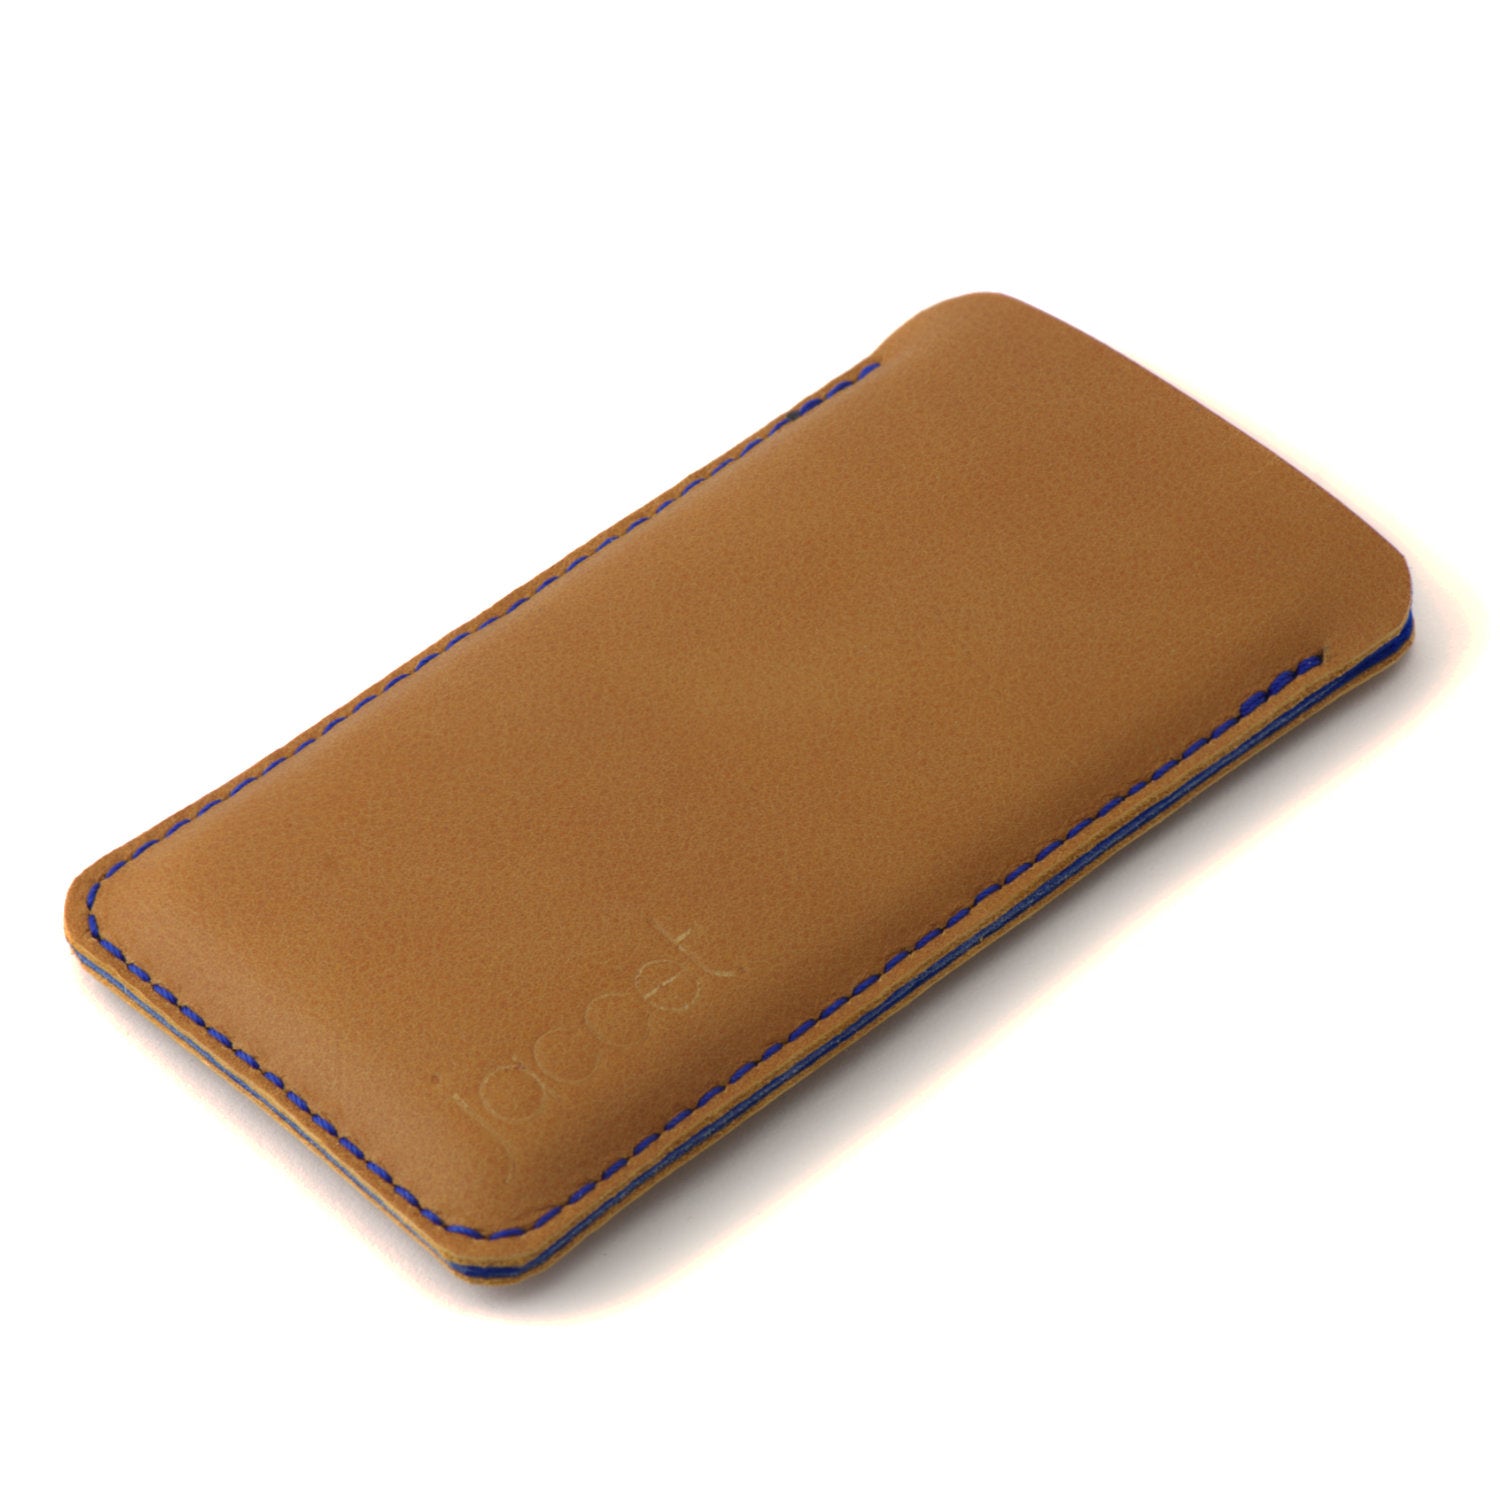 JACCET leather iPhone sleeve - Cognac color leather with blue wool felt - 100% Handmade